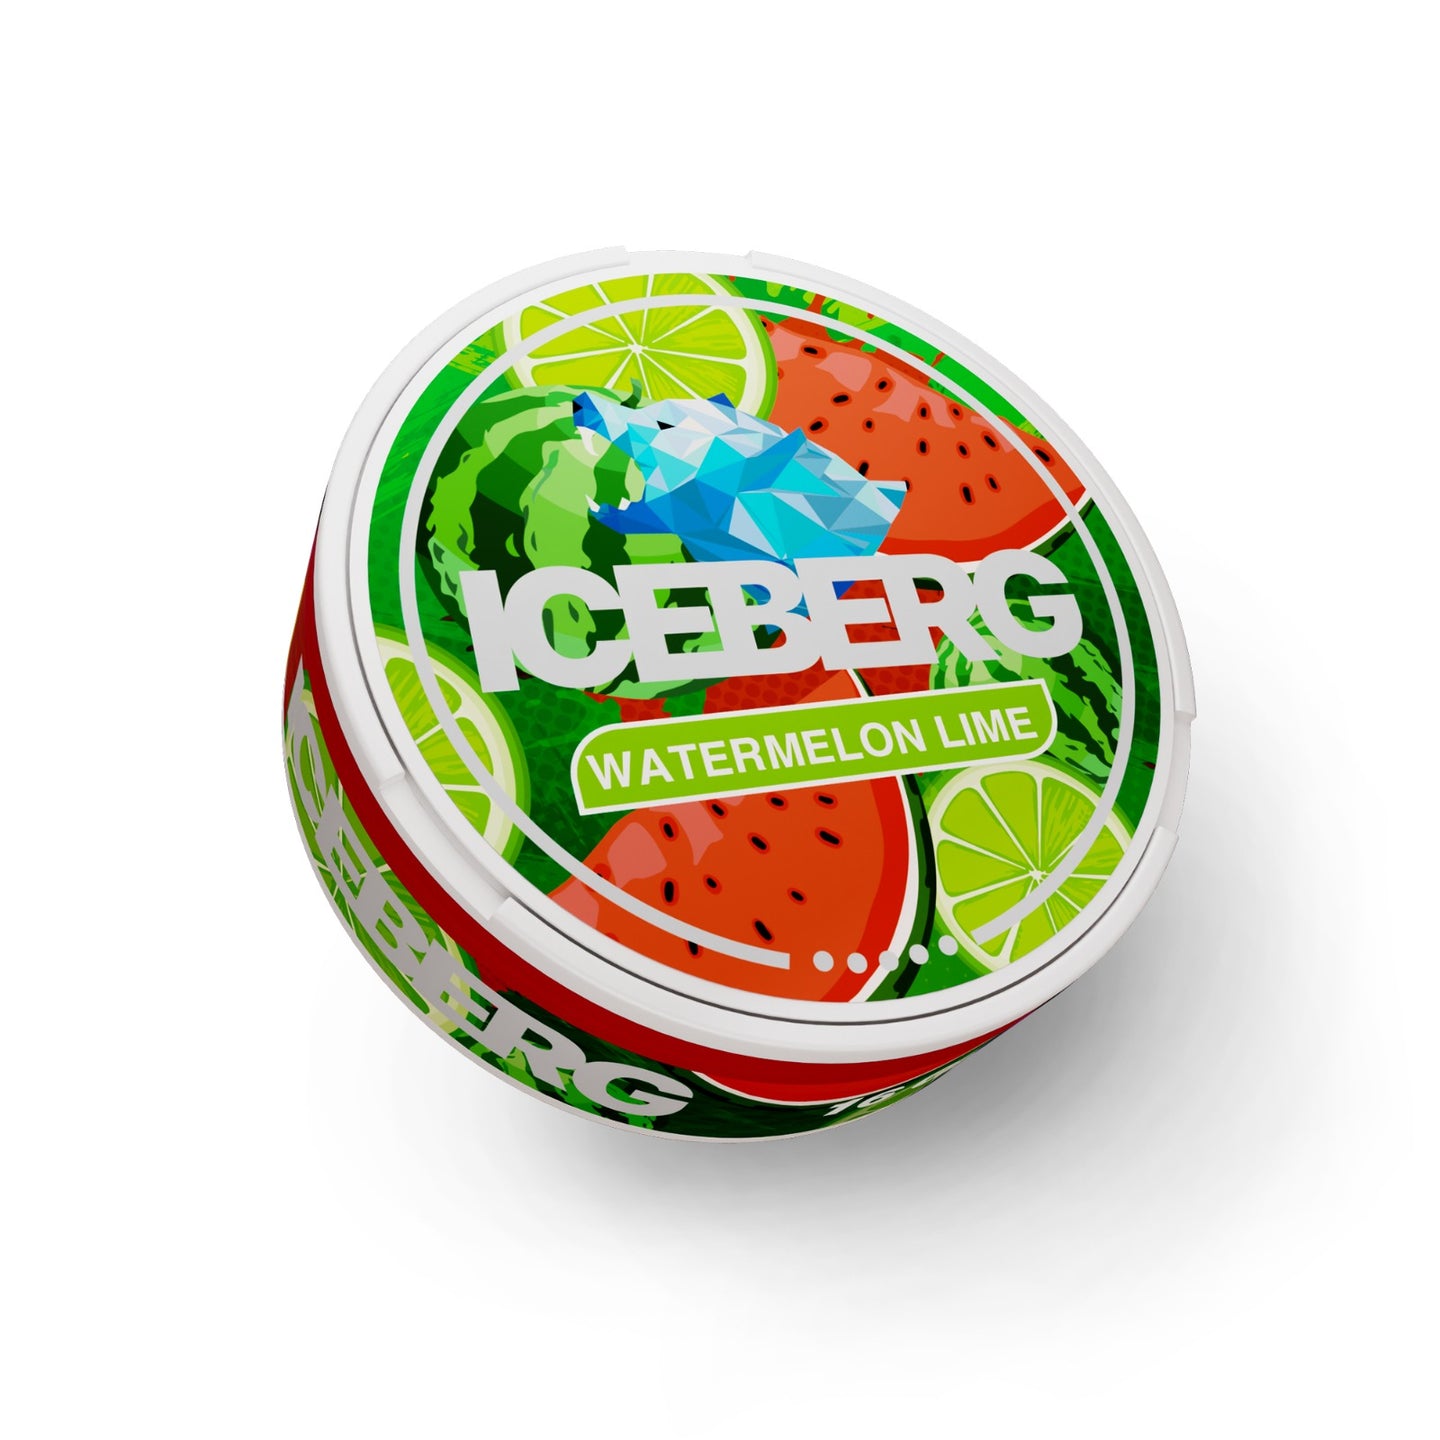 Buy Iceberg Watermelon Lime | Low Prices And Fast Delivery